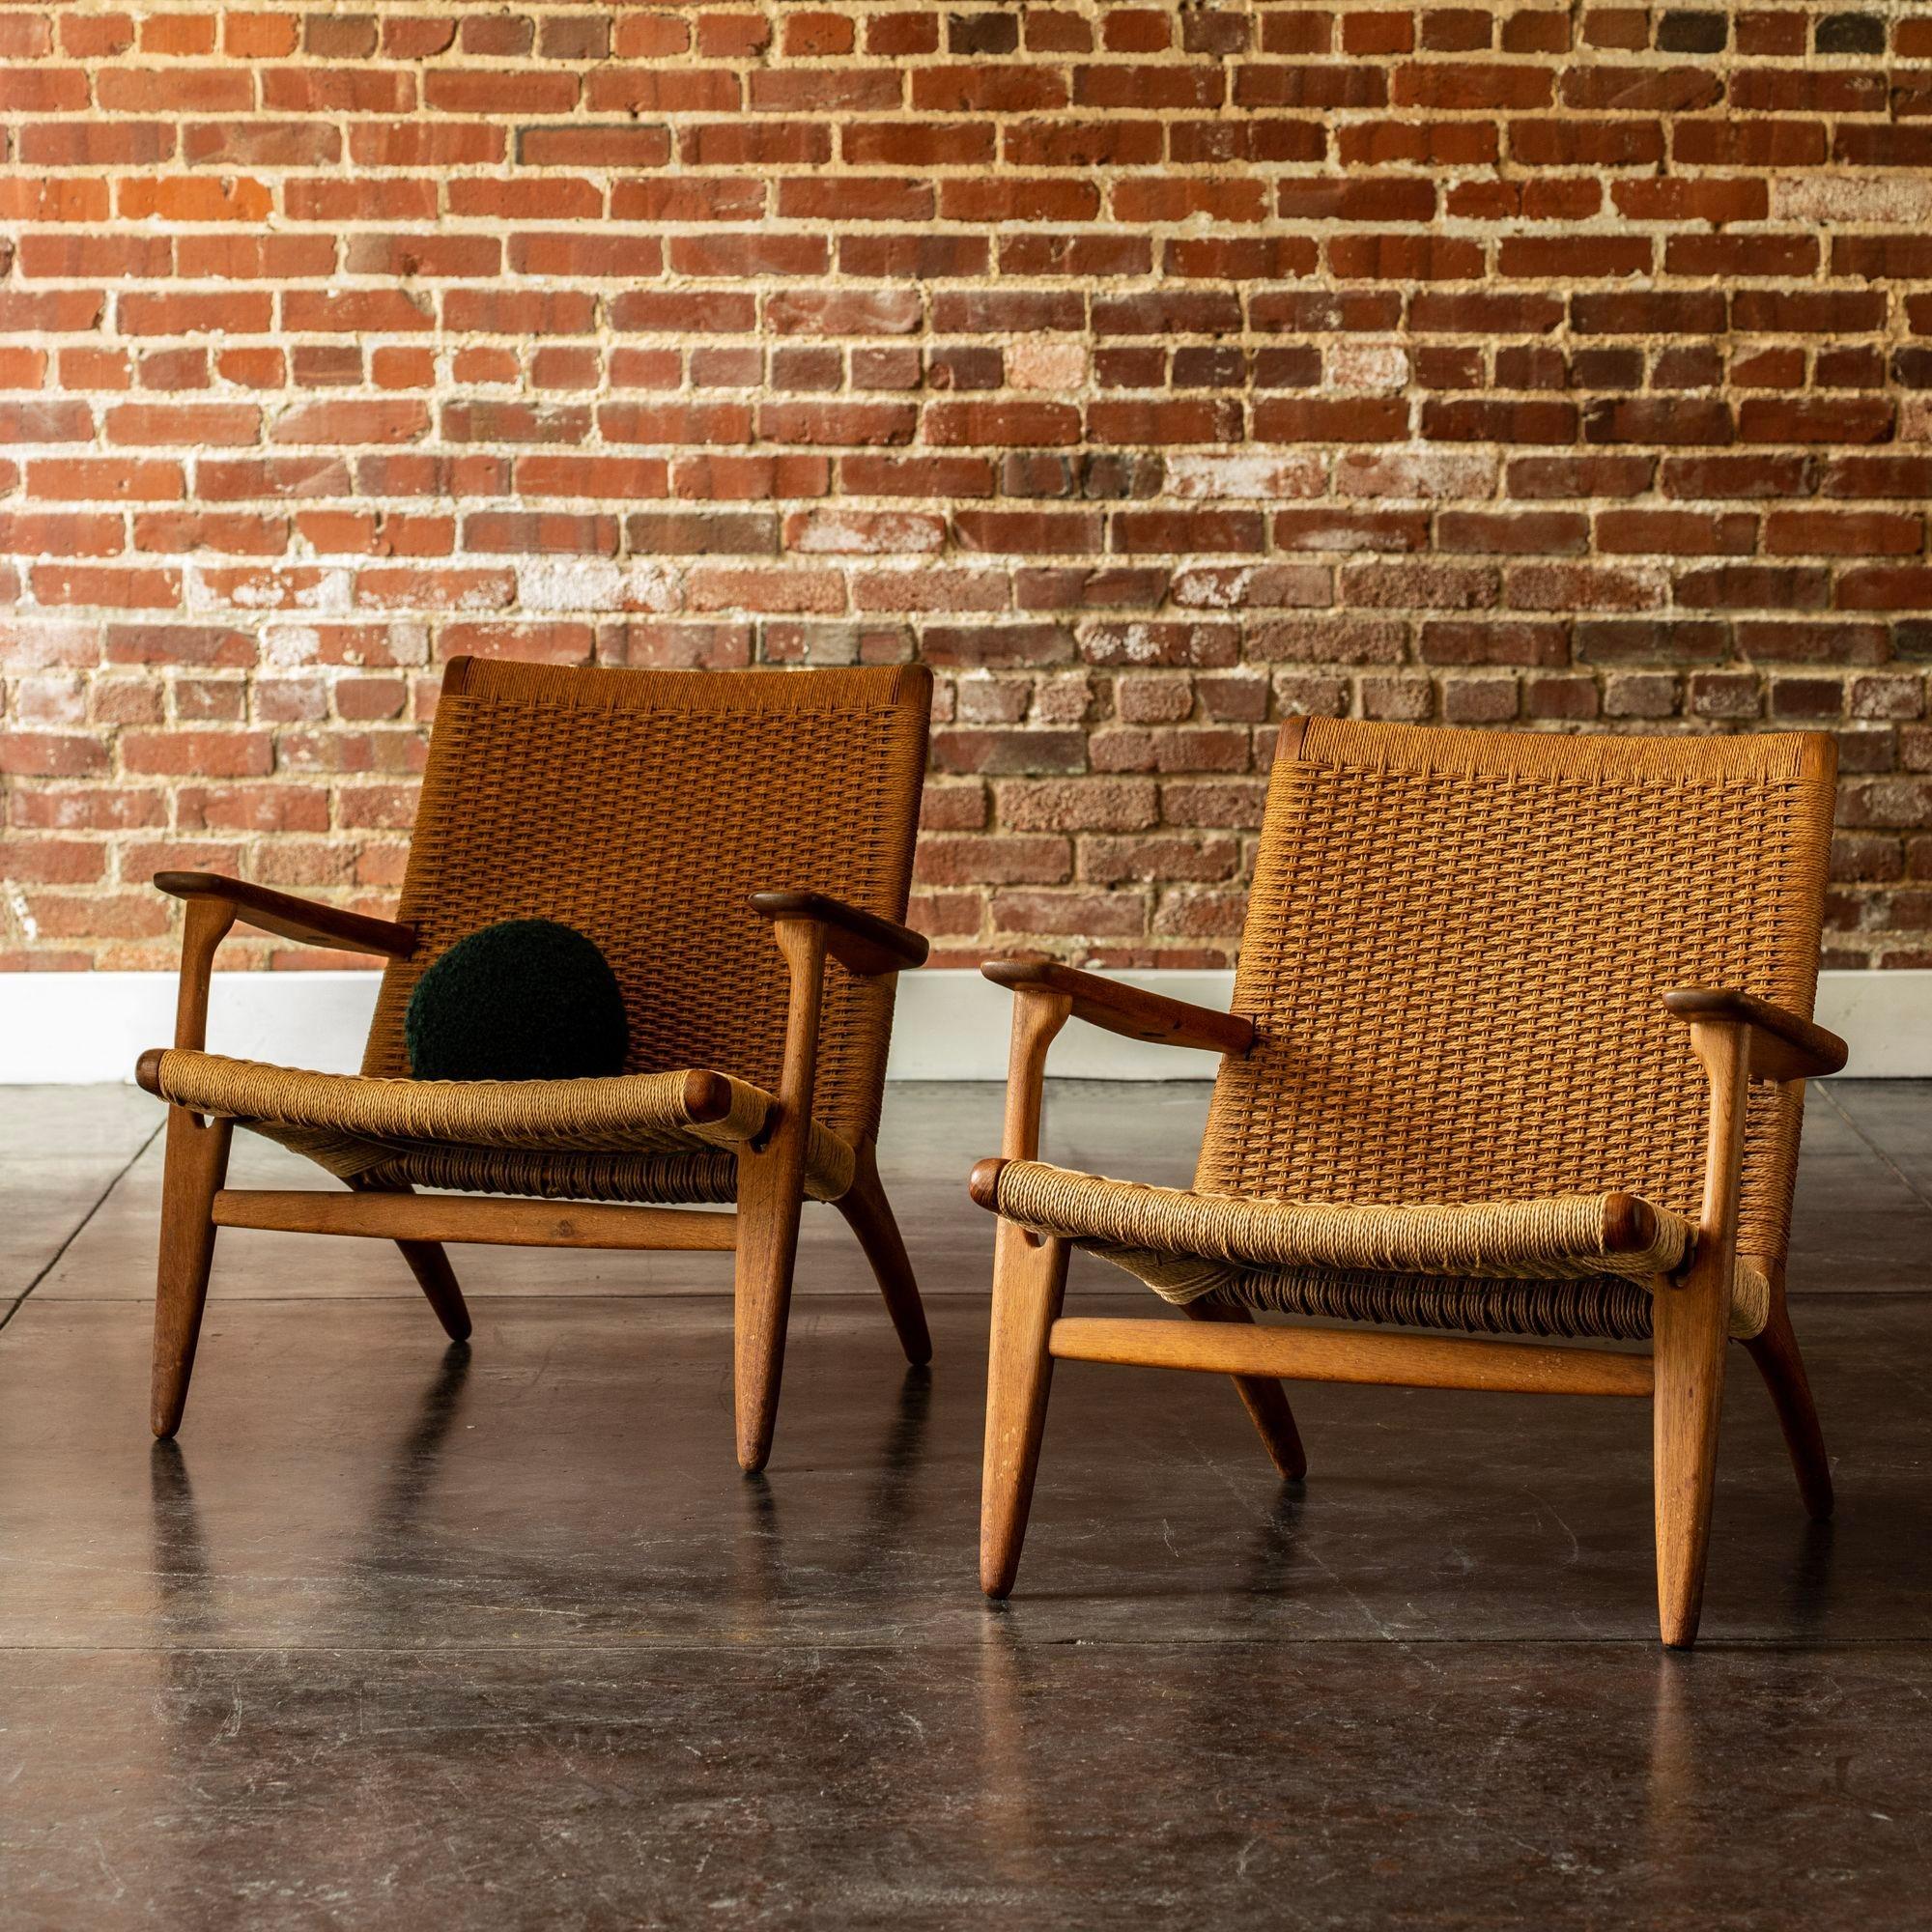 A lovely pair of iconic lounge chairs by Hans Wegner. The CH25 is a classic form executed in oak and paper cord by Carl Hansen & Son. In excellent vintage condition with Danish Control stamp.
 
h 29 in x w 27 in x d 28 in
Seat height 14 in.